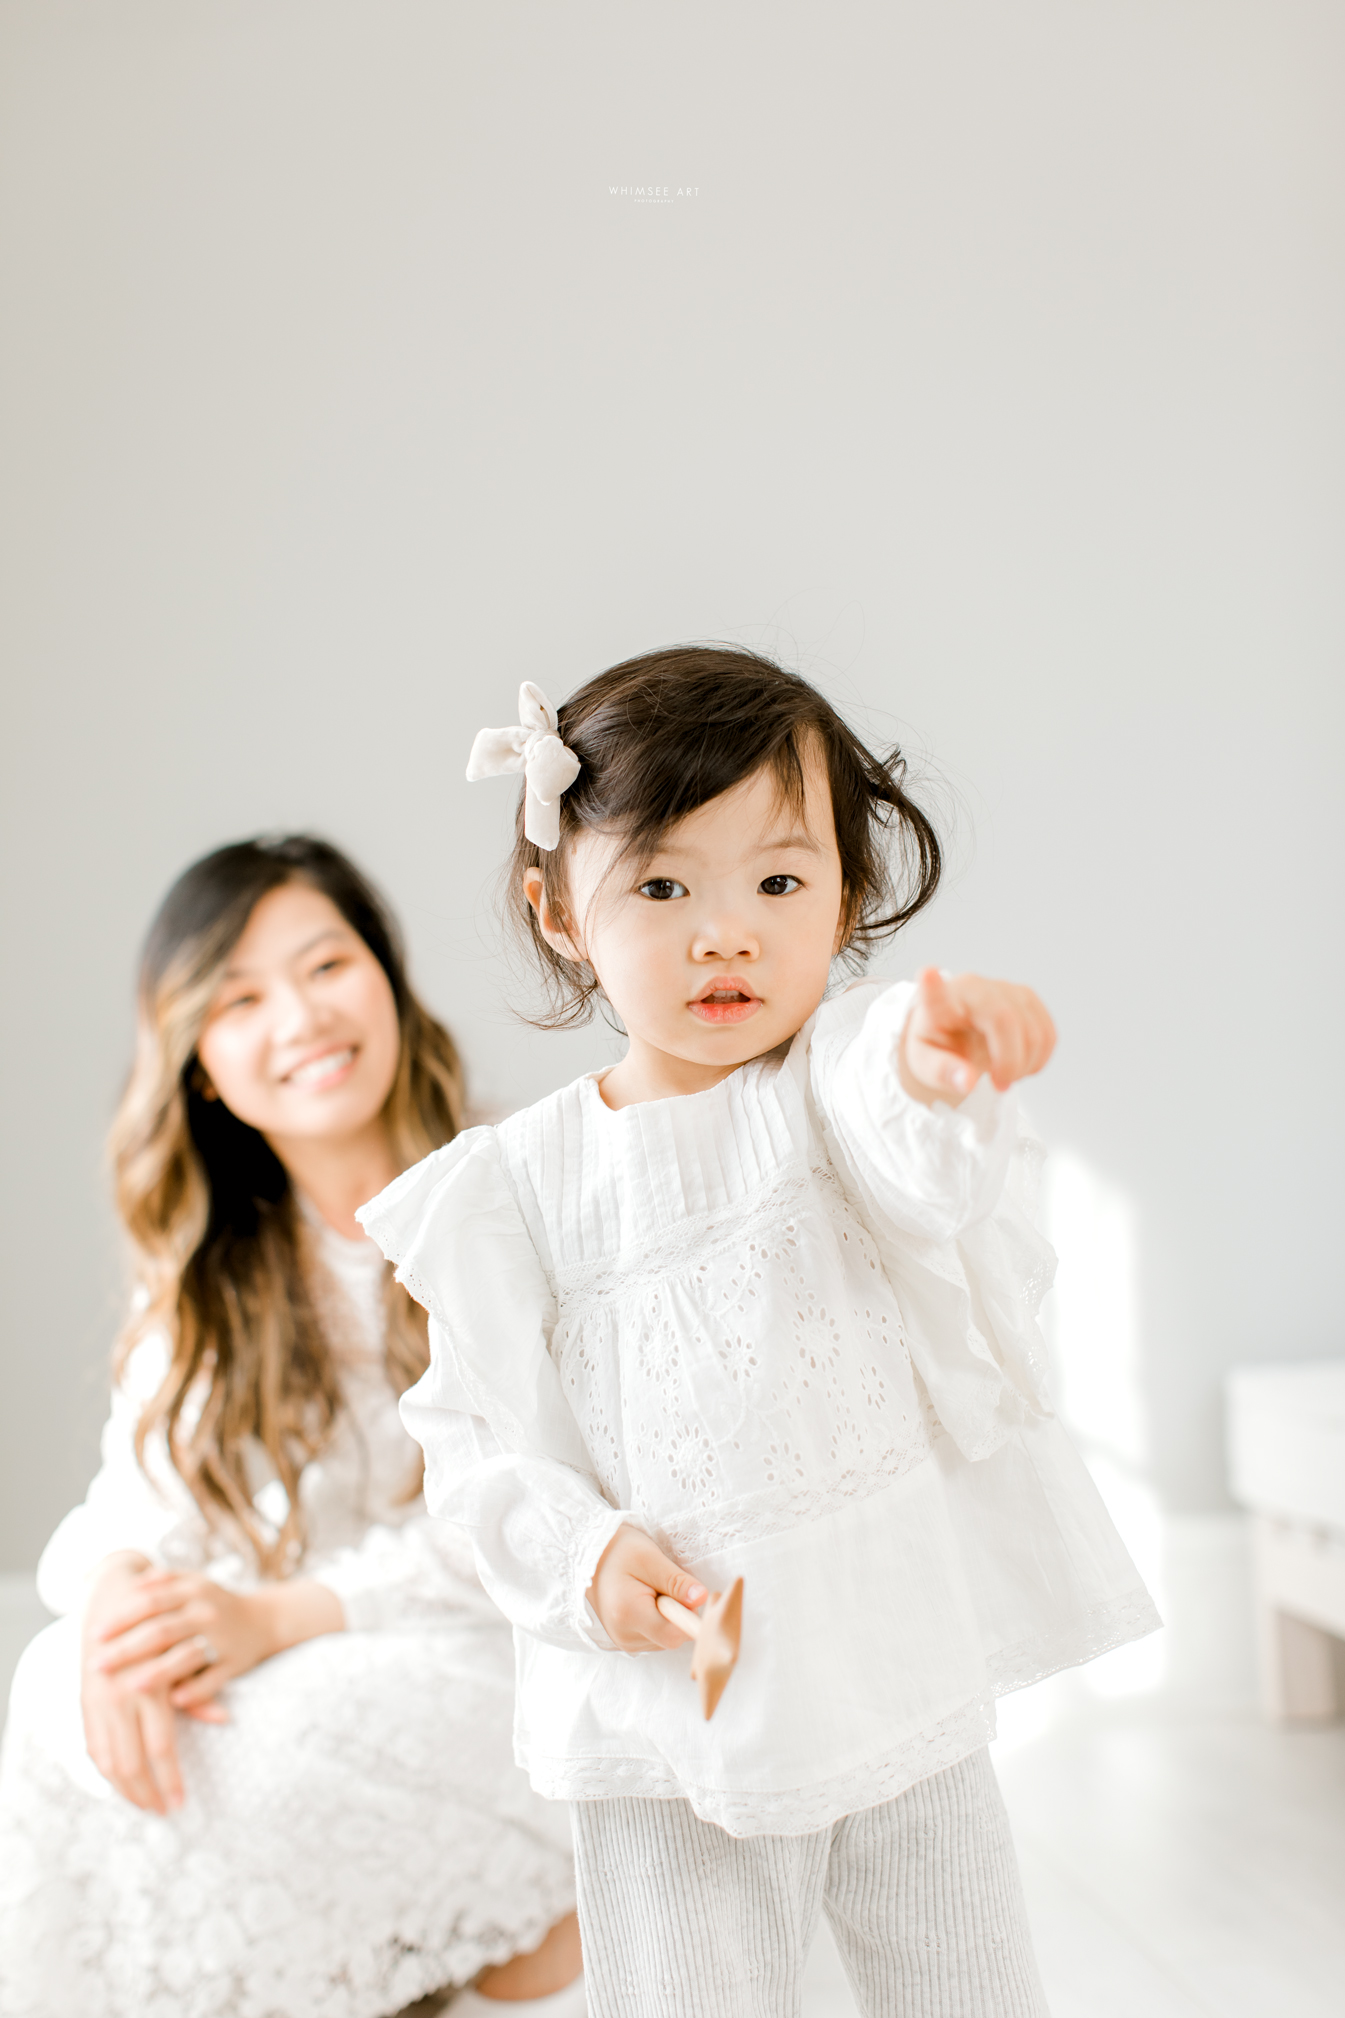 Sweet Clare | Roanoke Family Photography | Whimsee Art Photography